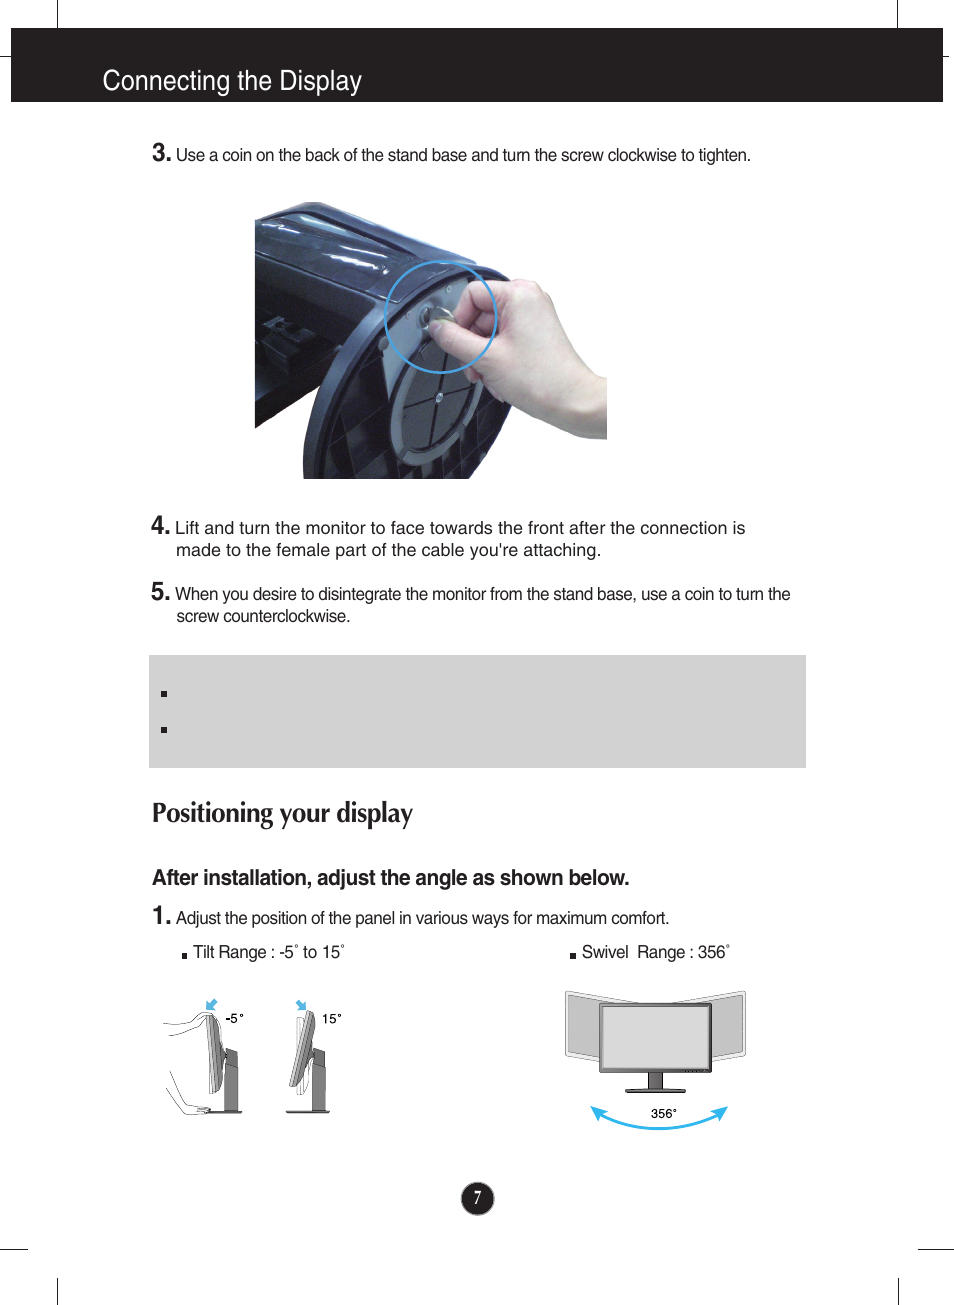 Positioning your display, Connecting the display | LG IPS231B-BN User Manual | Page 8 / 31